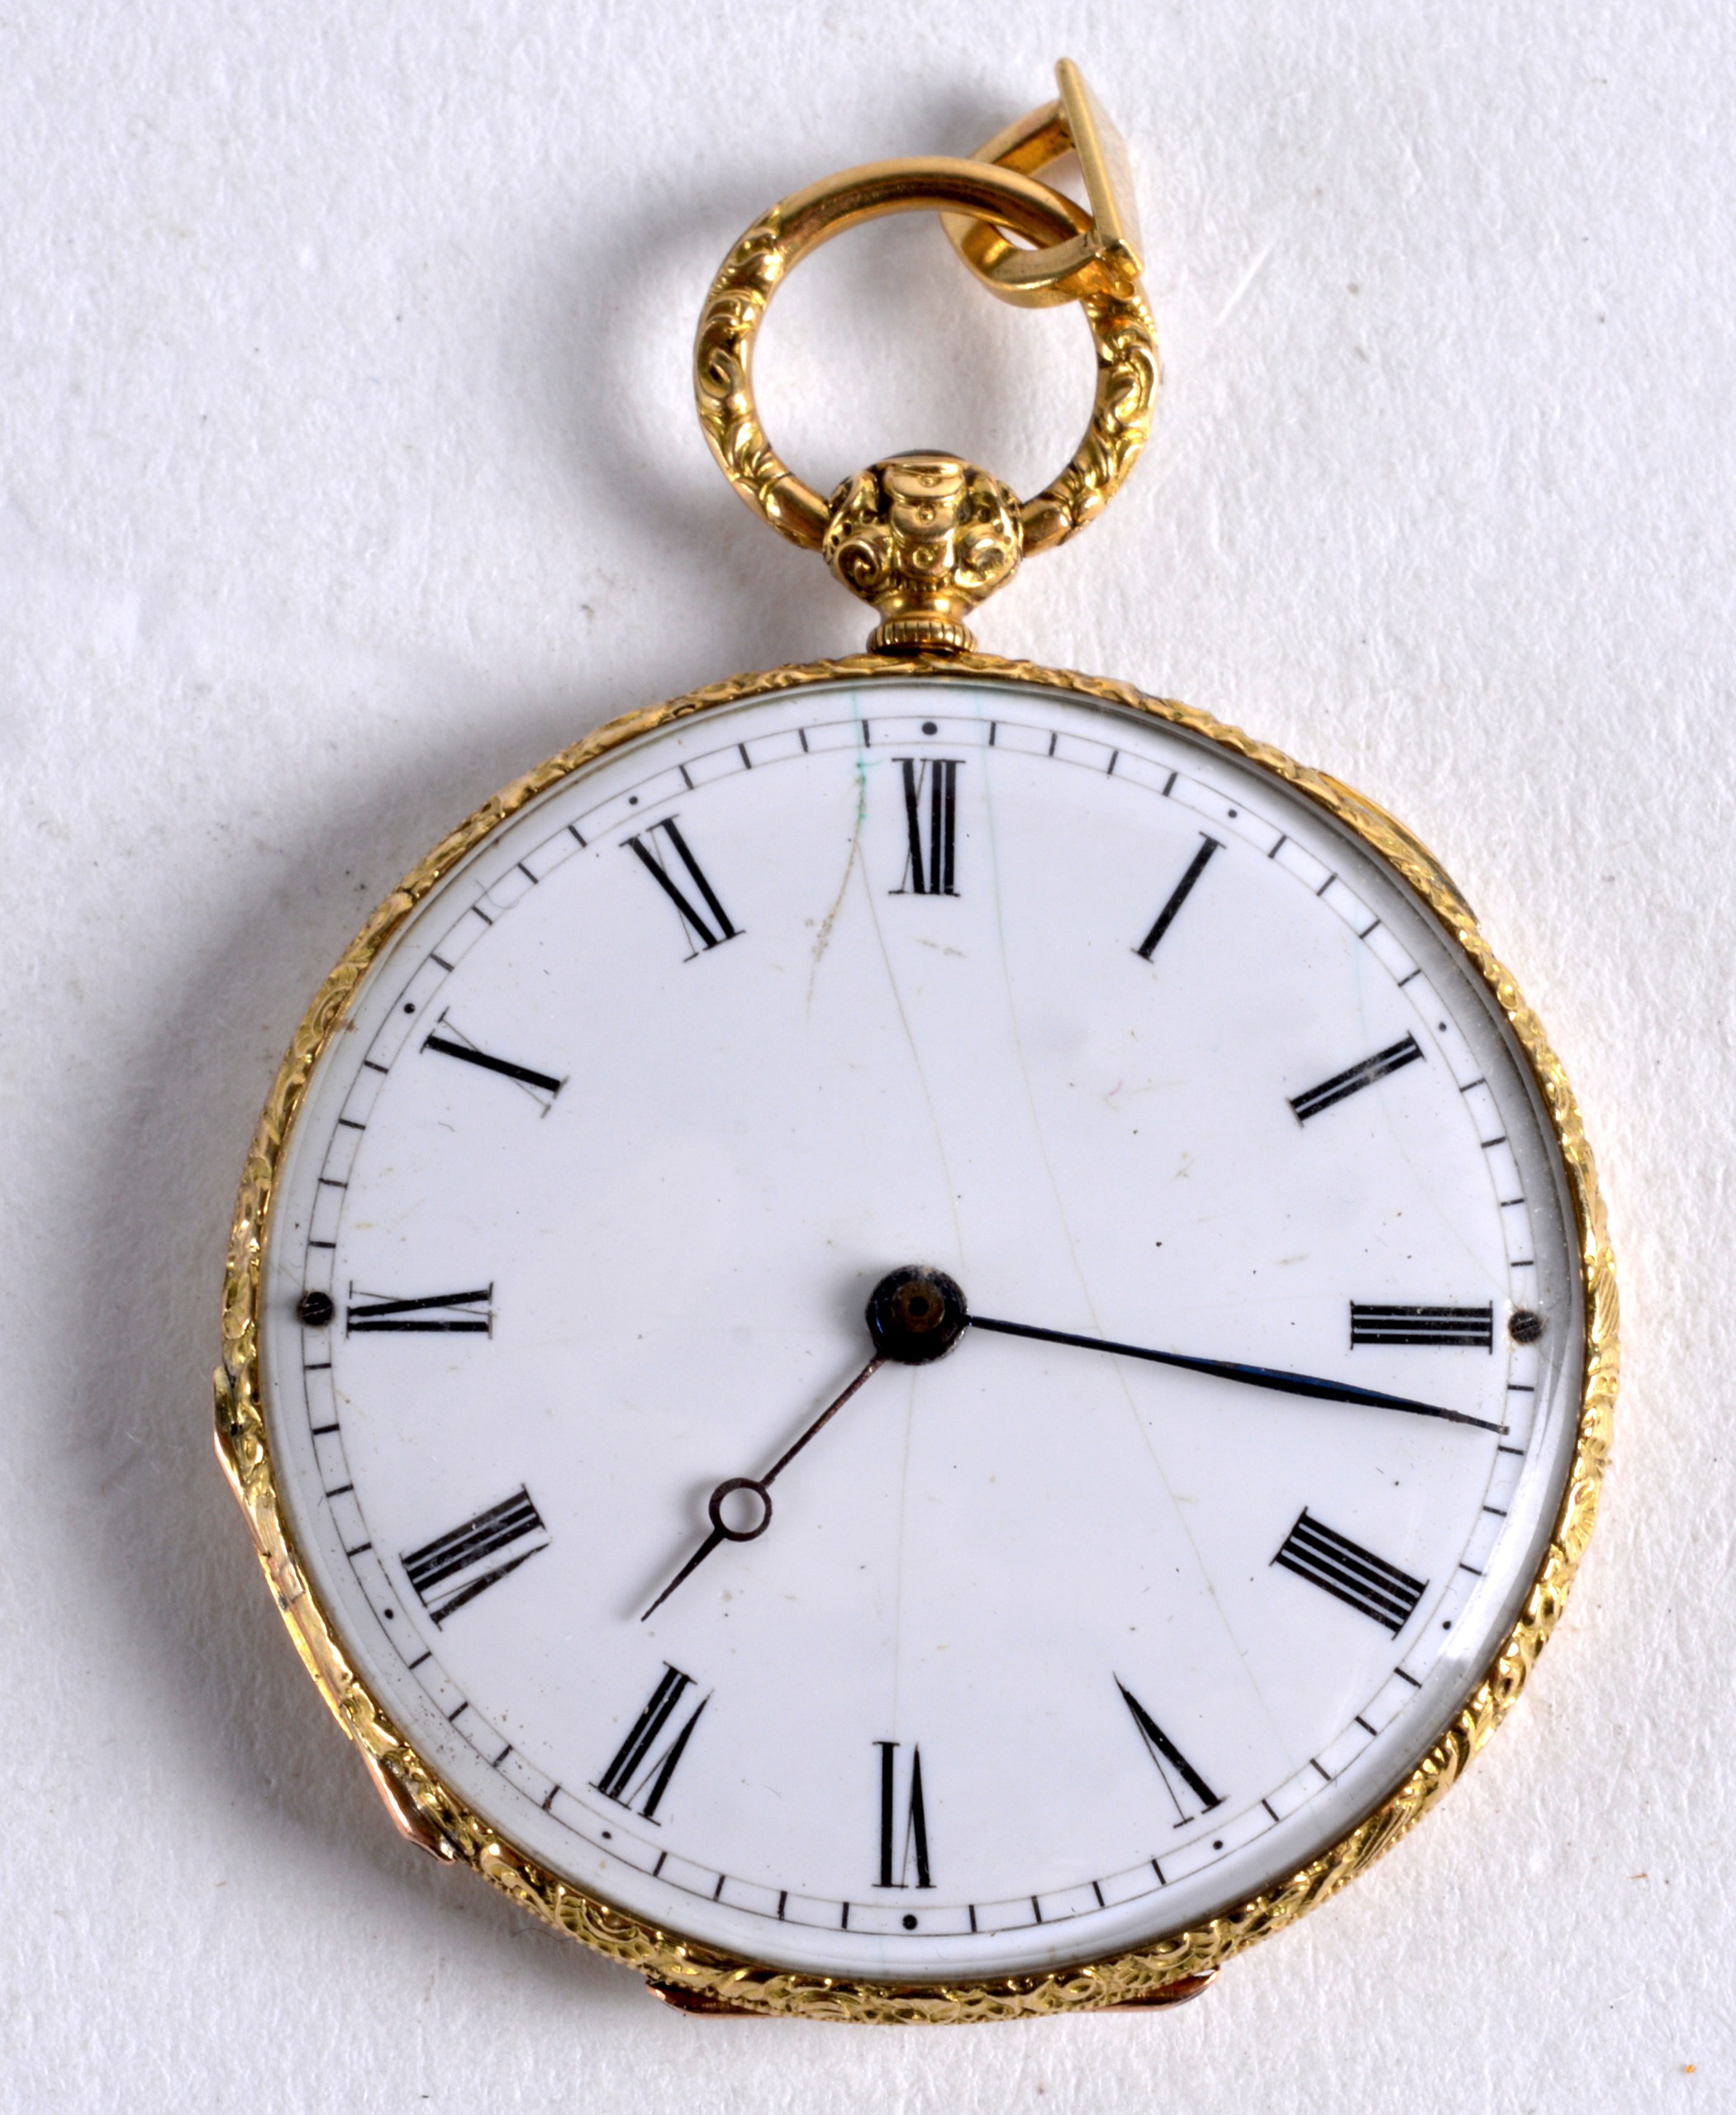 A LOVELY EDWARDIAN 18CT YELLOW GOLD AND ENAMEL LADIES FOB WATCH. 1.25ins diameter.